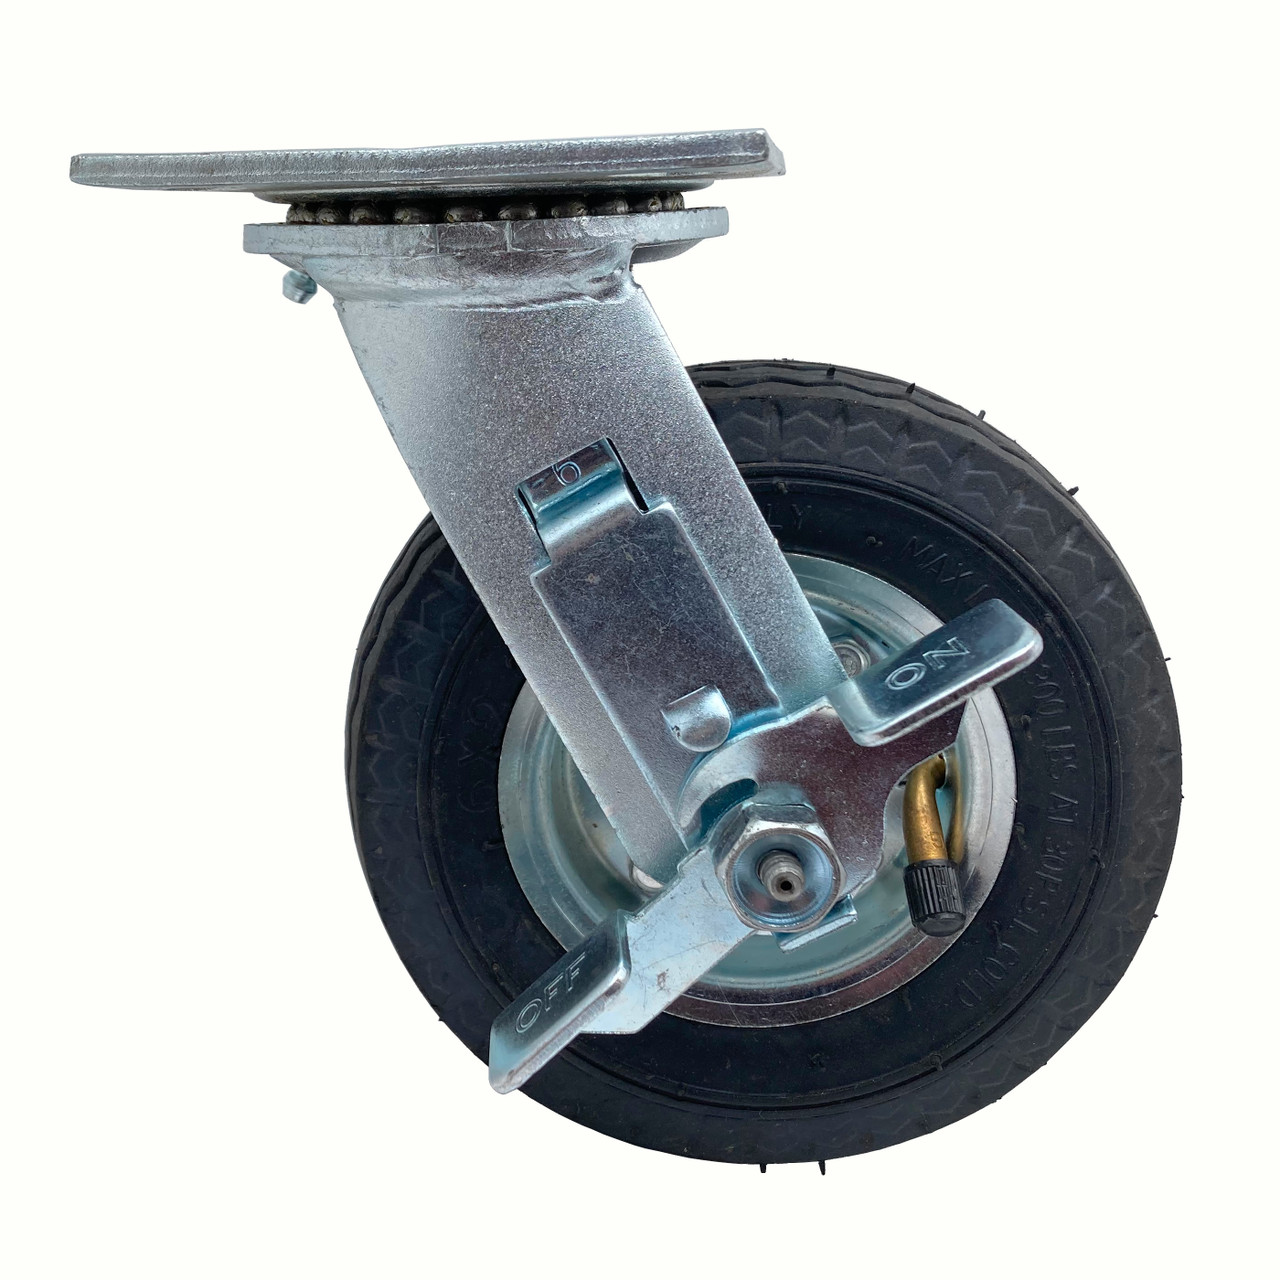 6"  pneumatic swivel caster with brake